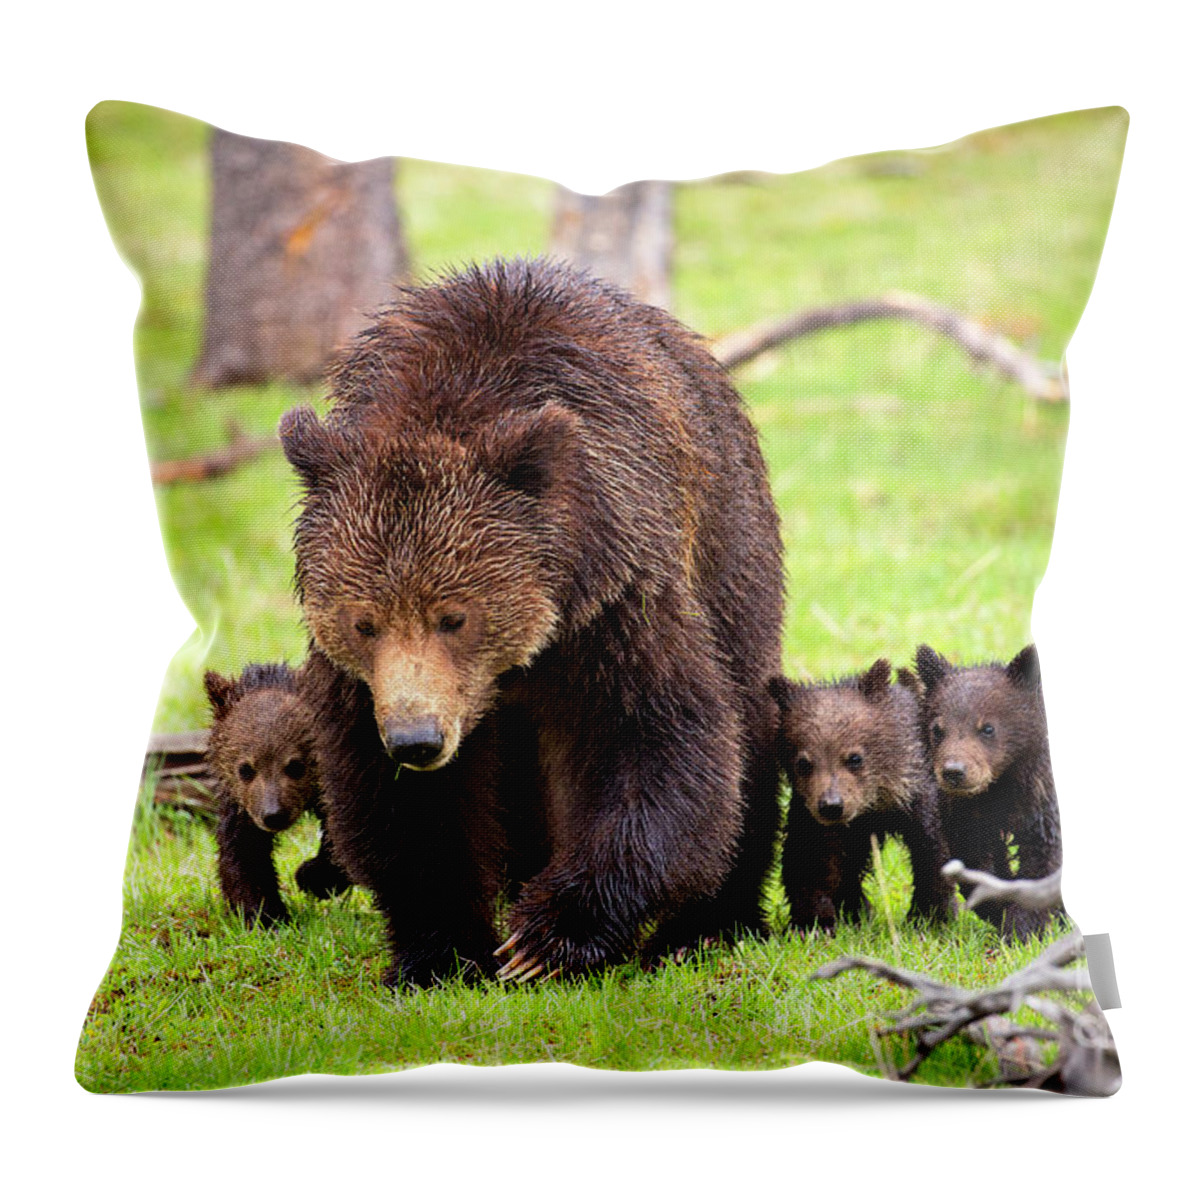 Grizzly Bears Throw Pillow featuring the photograph Obsidian Family by Aaron Whittemore